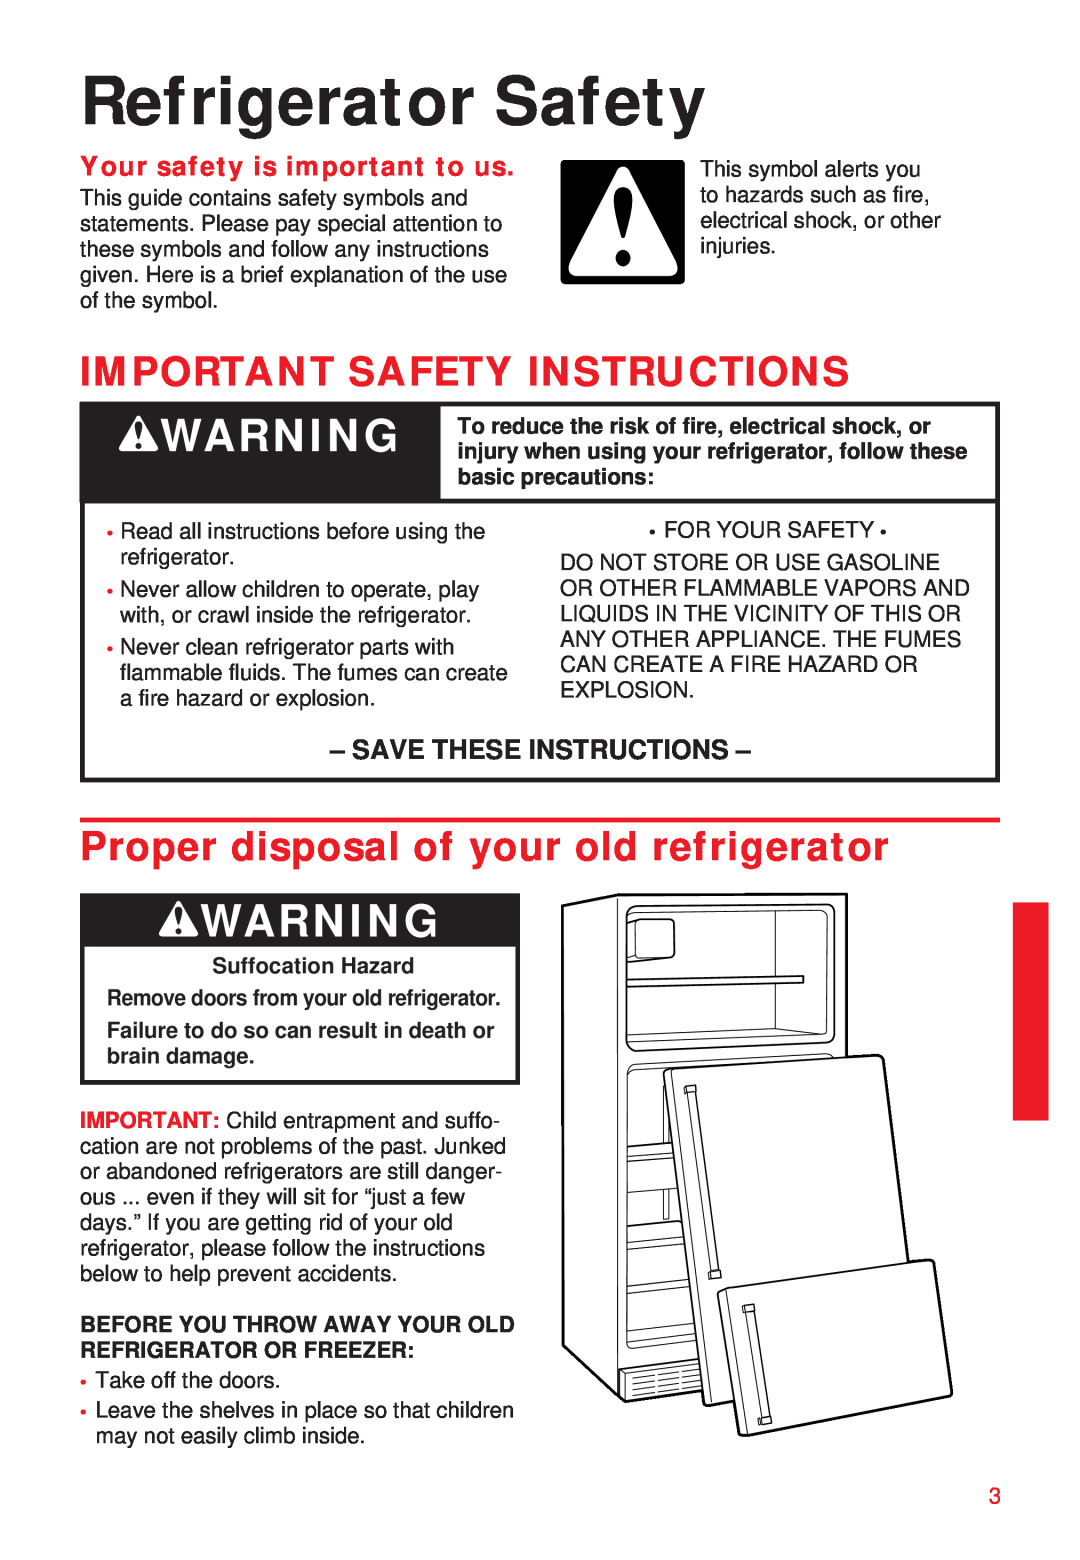 Whirlpool 2195258 Refrigerator Safety, wWARNING, Important Safety Instructions, Proper disposal of your old refrigerator 